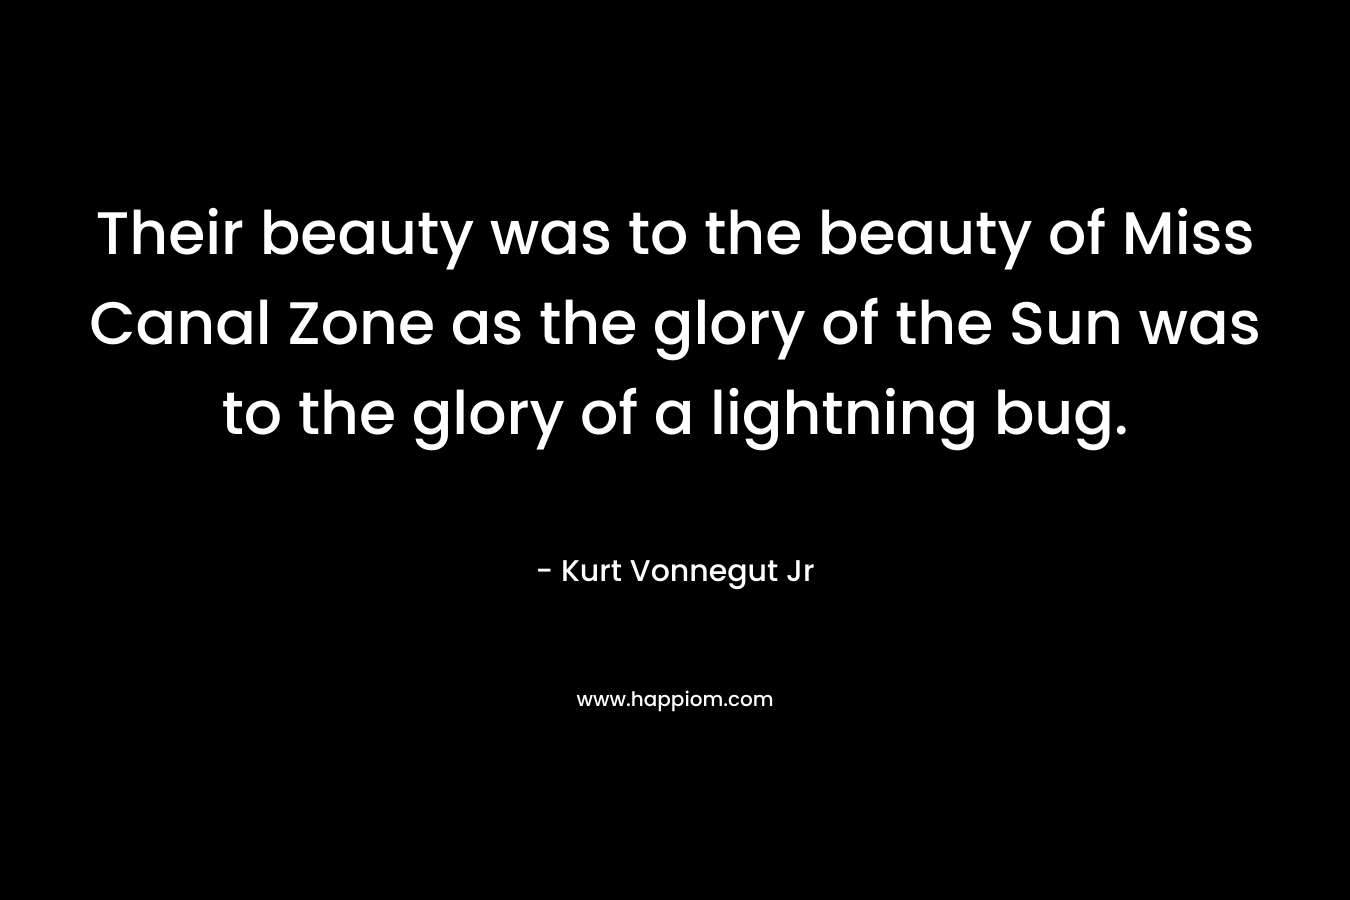 Their beauty was to the beauty of Miss Canal Zone as the glory of the Sun was to the glory of a lightning bug.